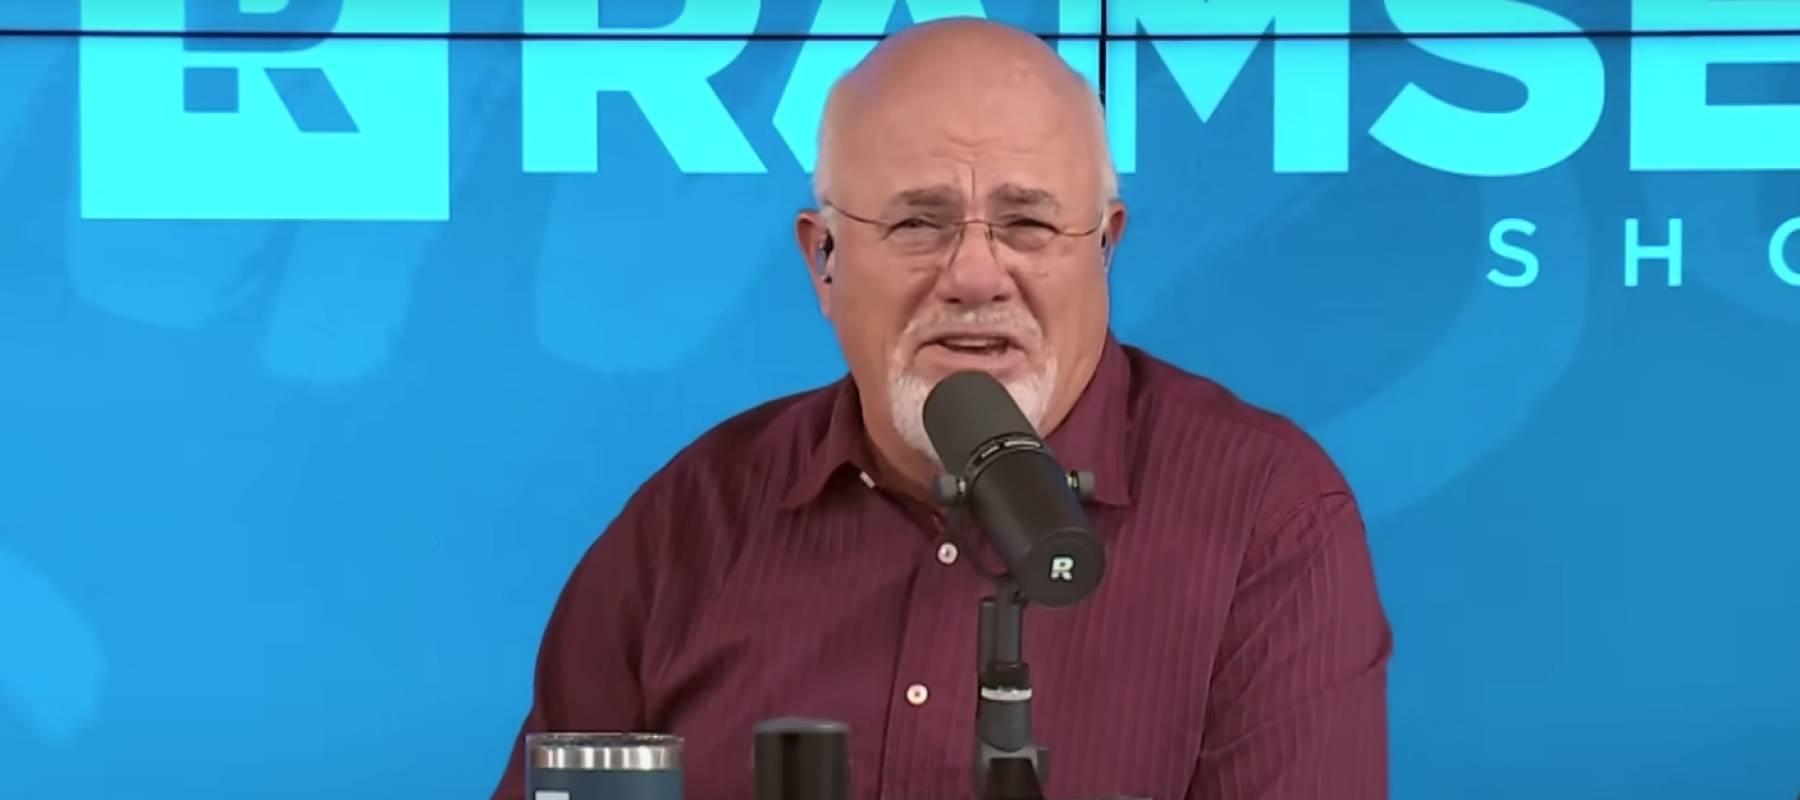 Dave Ramsey seen on set of his podcast, making an angry face and speaking into a microphone.